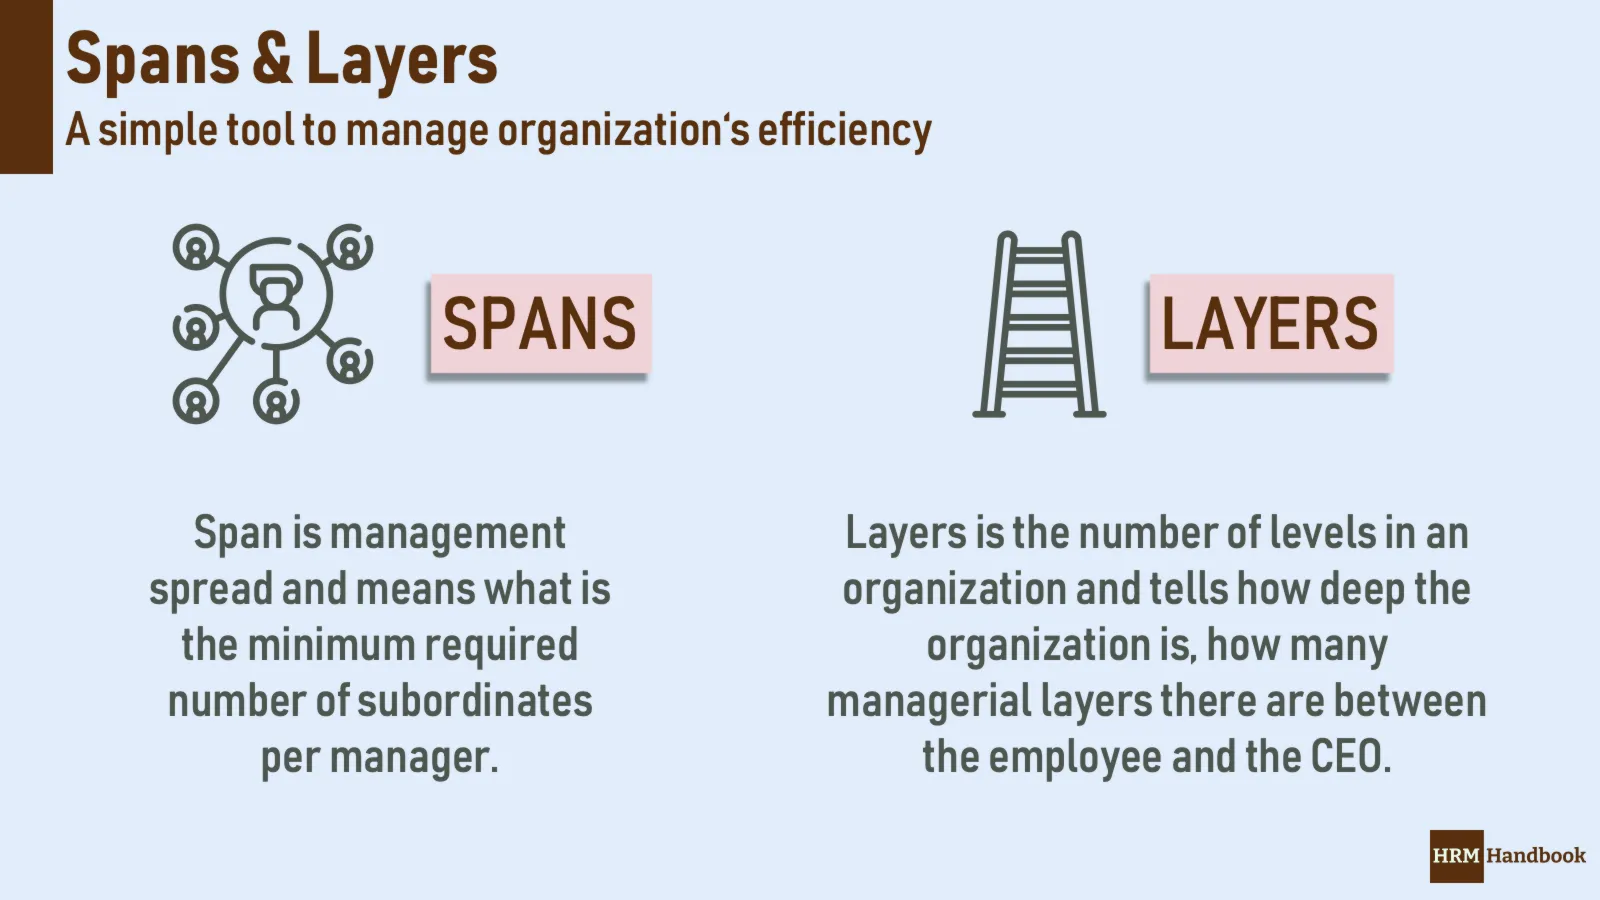 Spans and Layers in Human Resources explained